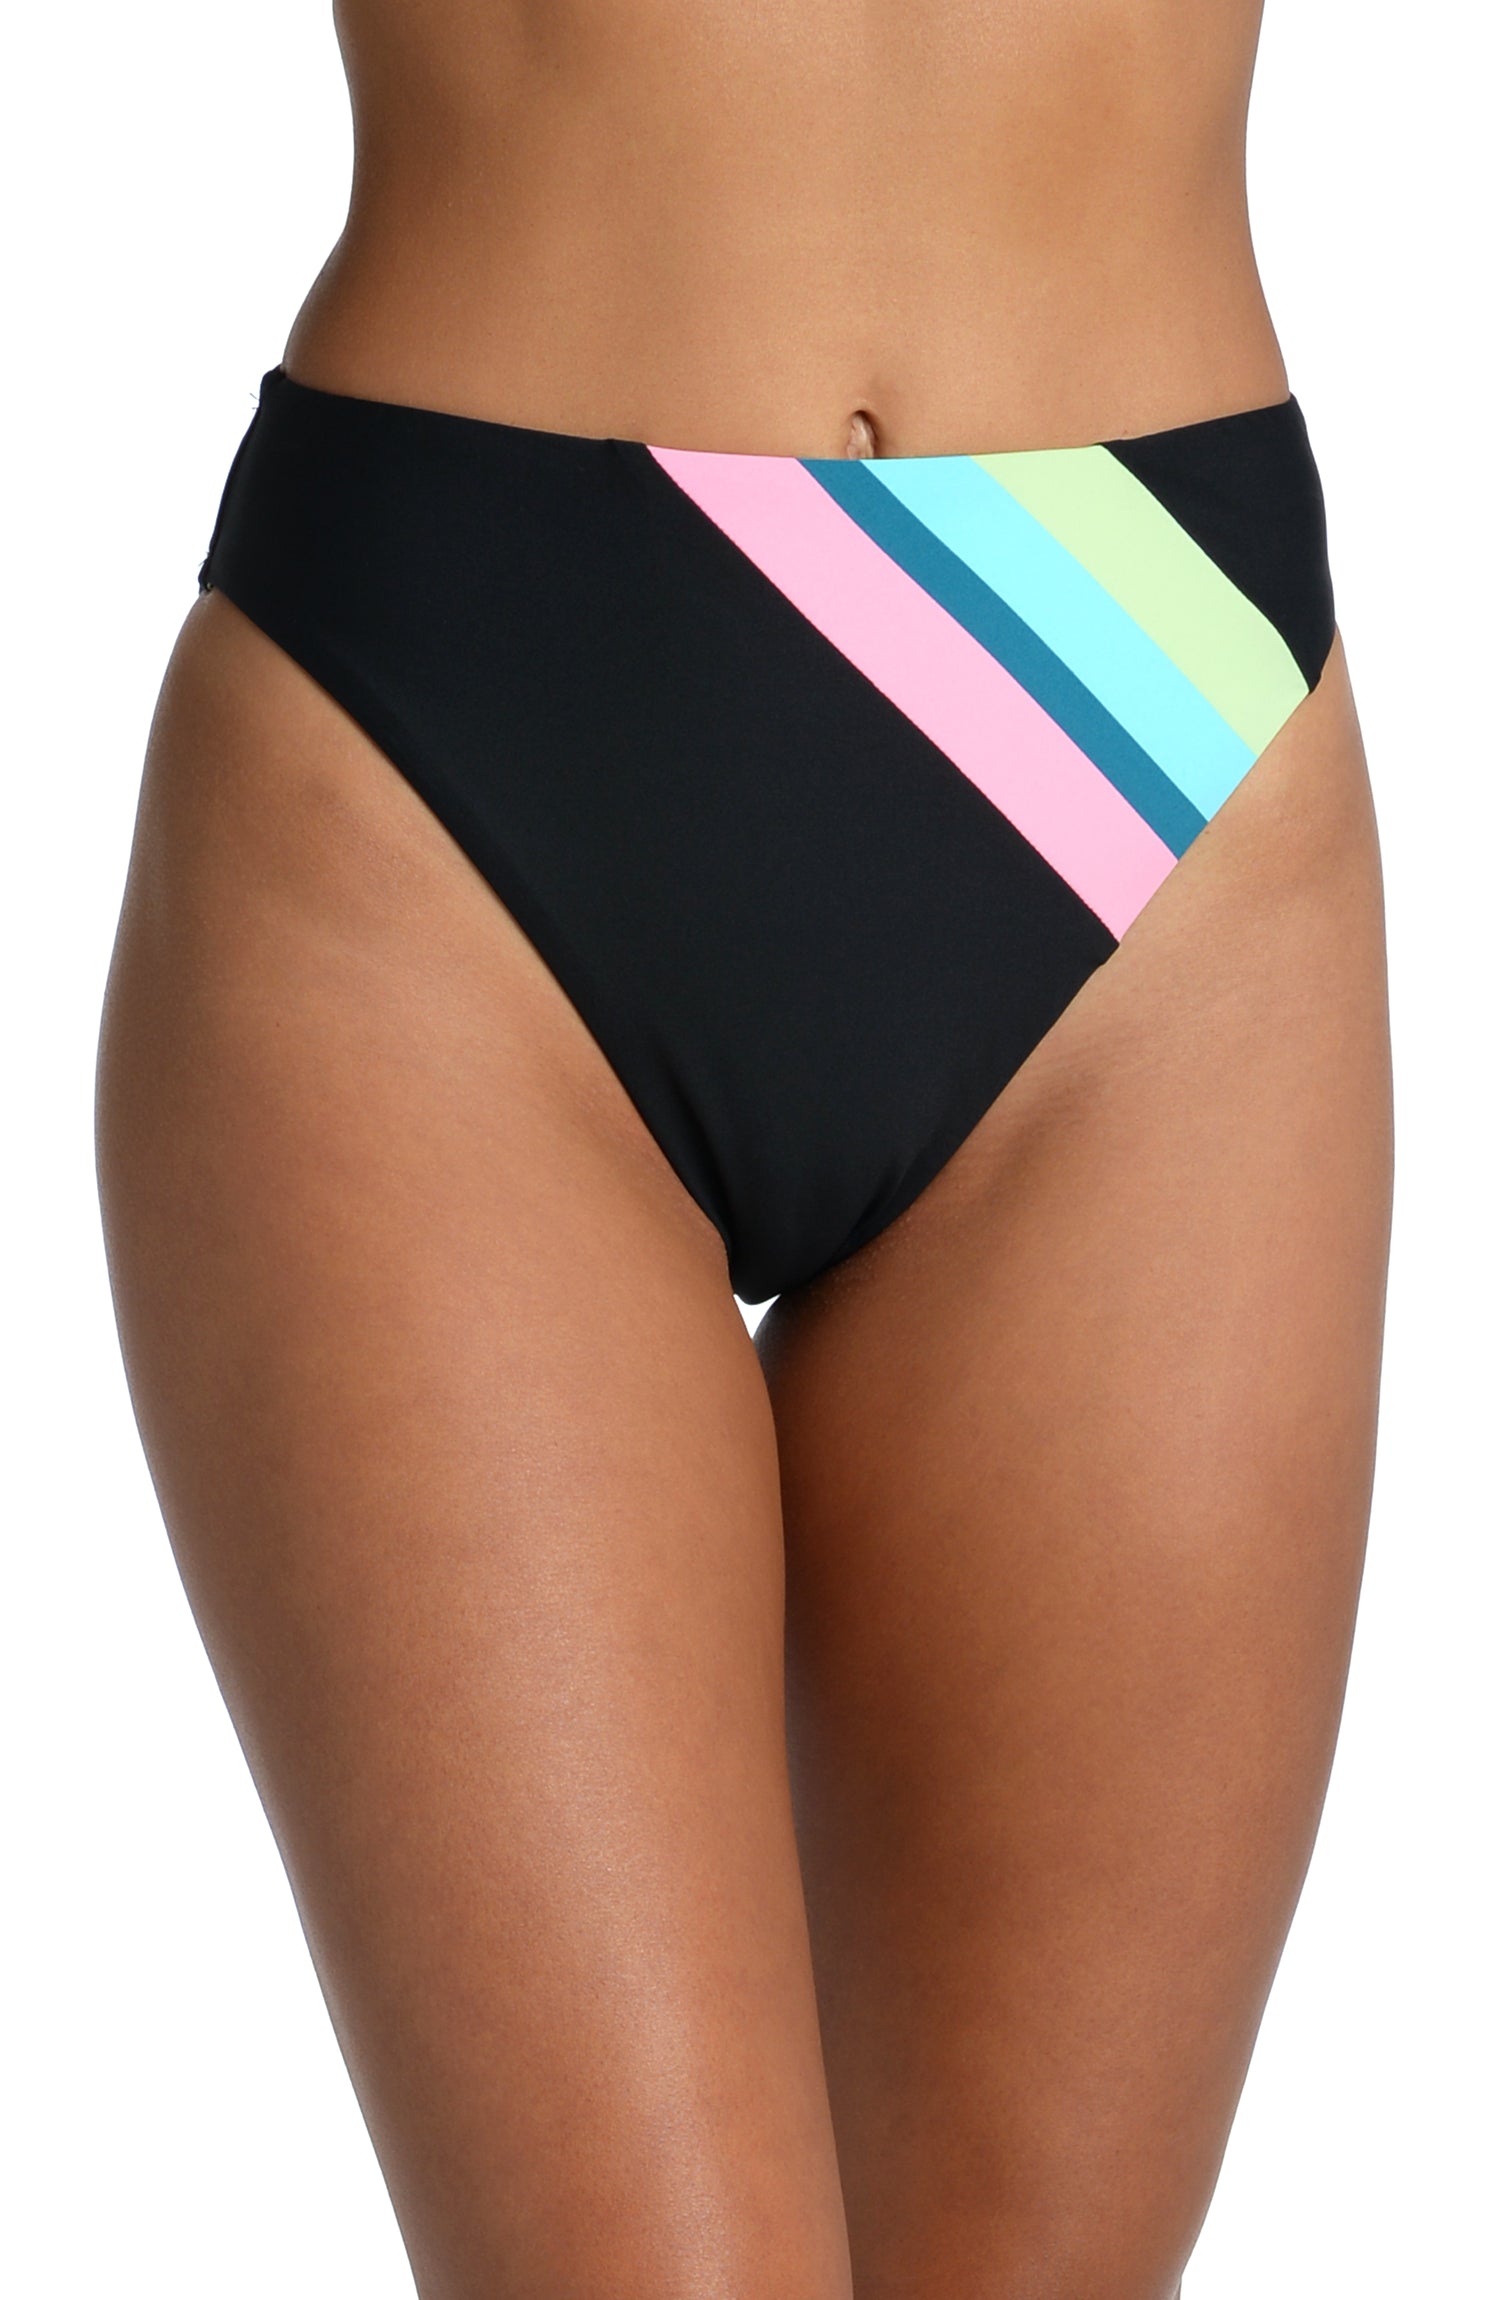 Model is wearing a vibrant colorblock against a solid black ground printed high waist bottom from our Colorblock collection!